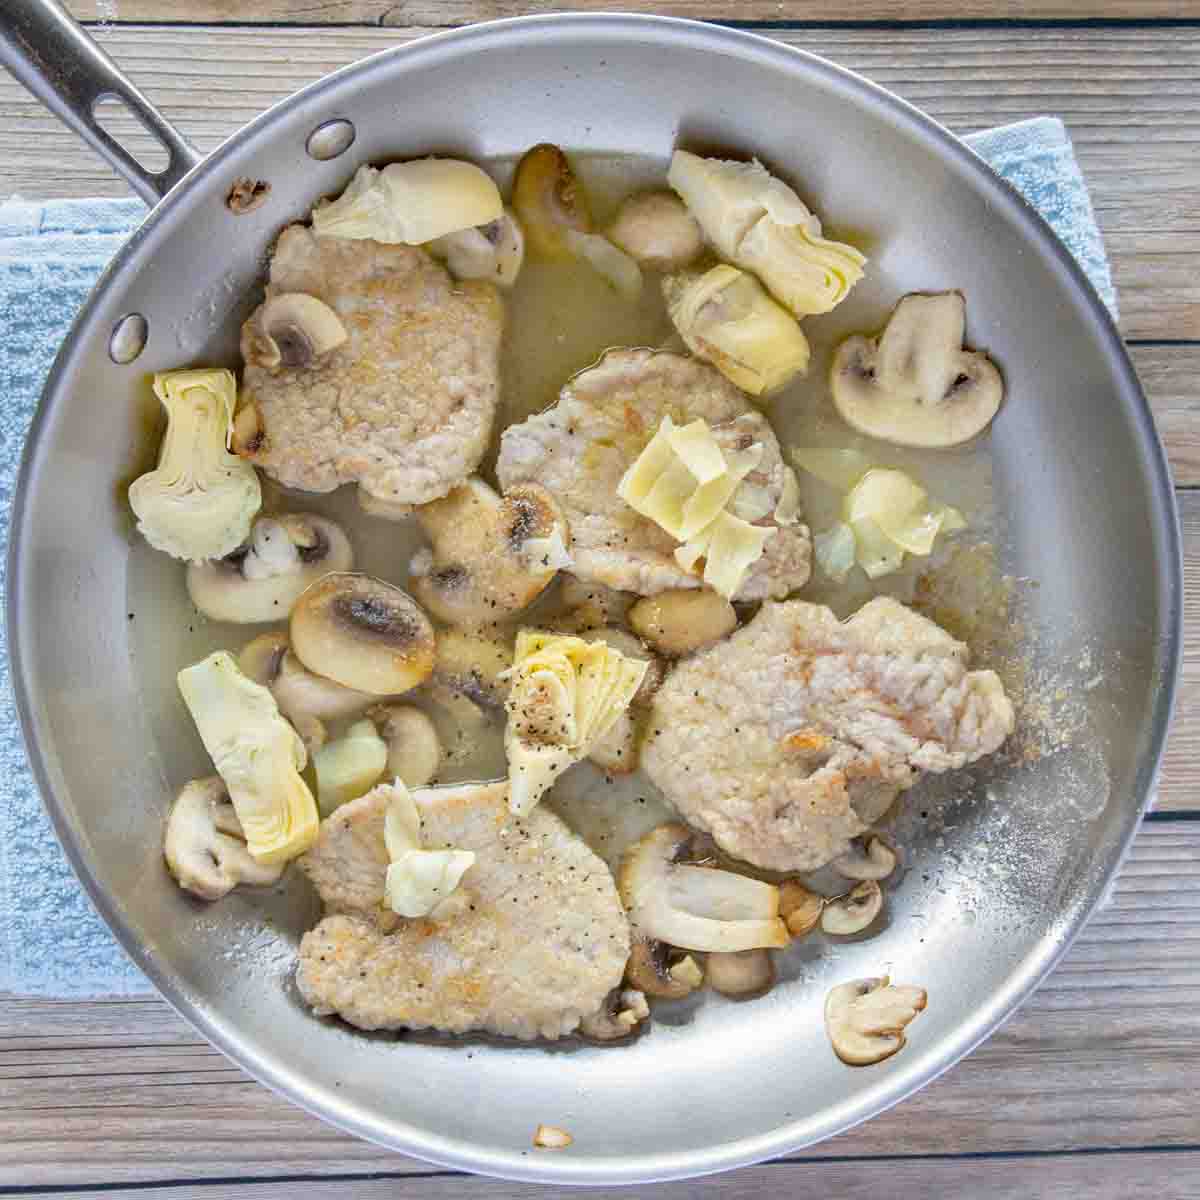 cooked veal medallions with mushrooms and artichokes in a saute pan